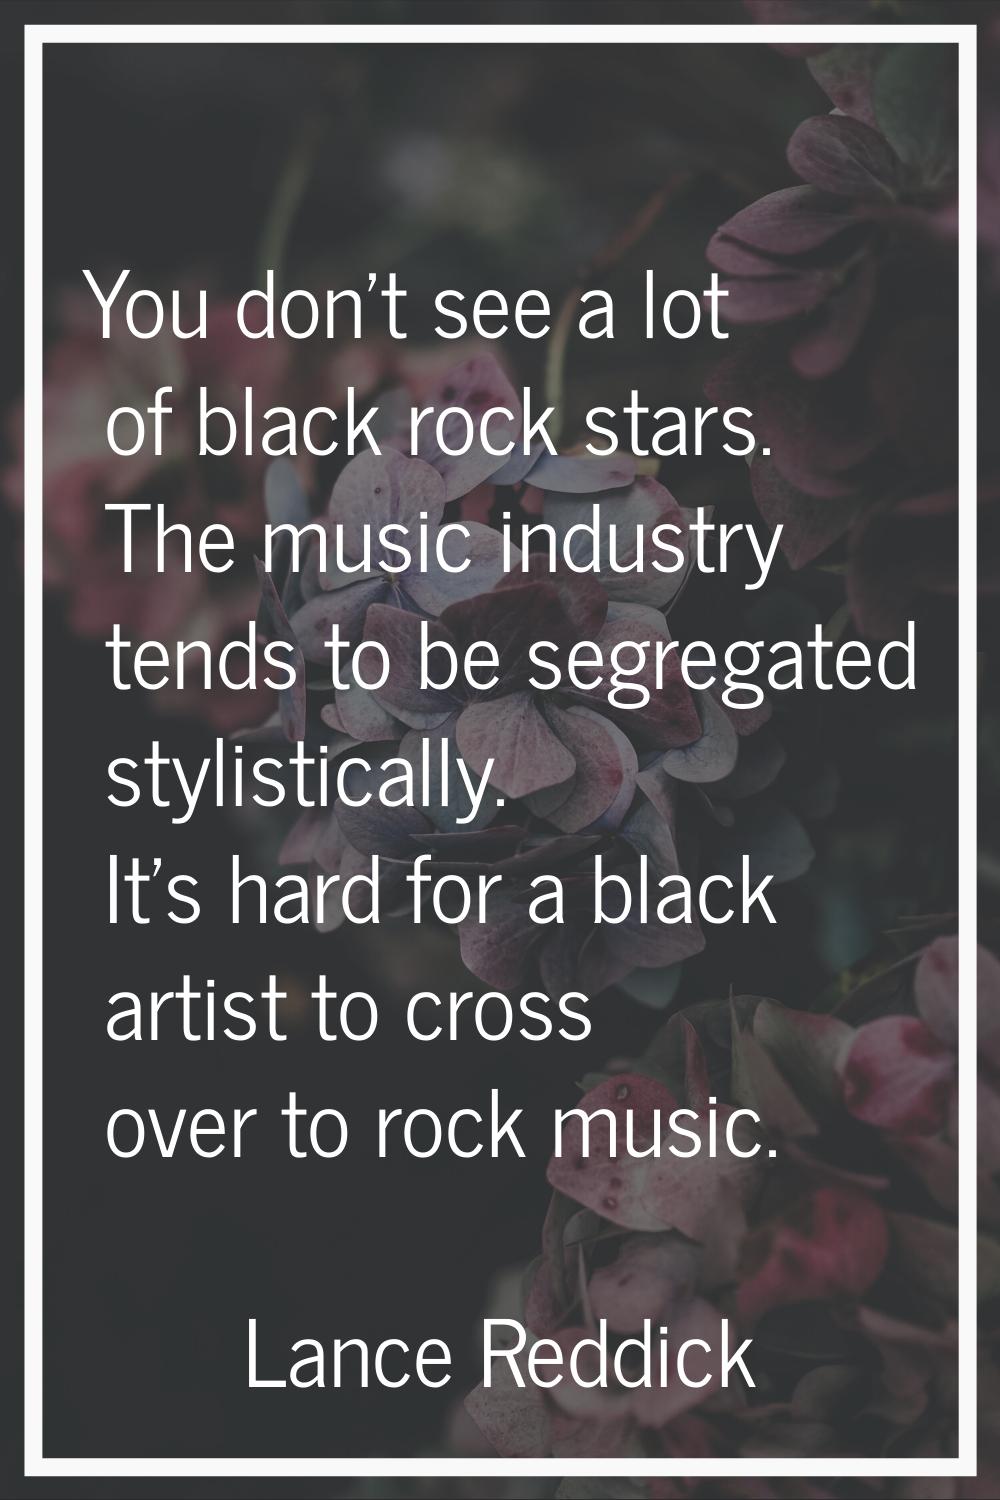 You don't see a lot of black rock stars. The music industry tends to be segregated stylistically. I